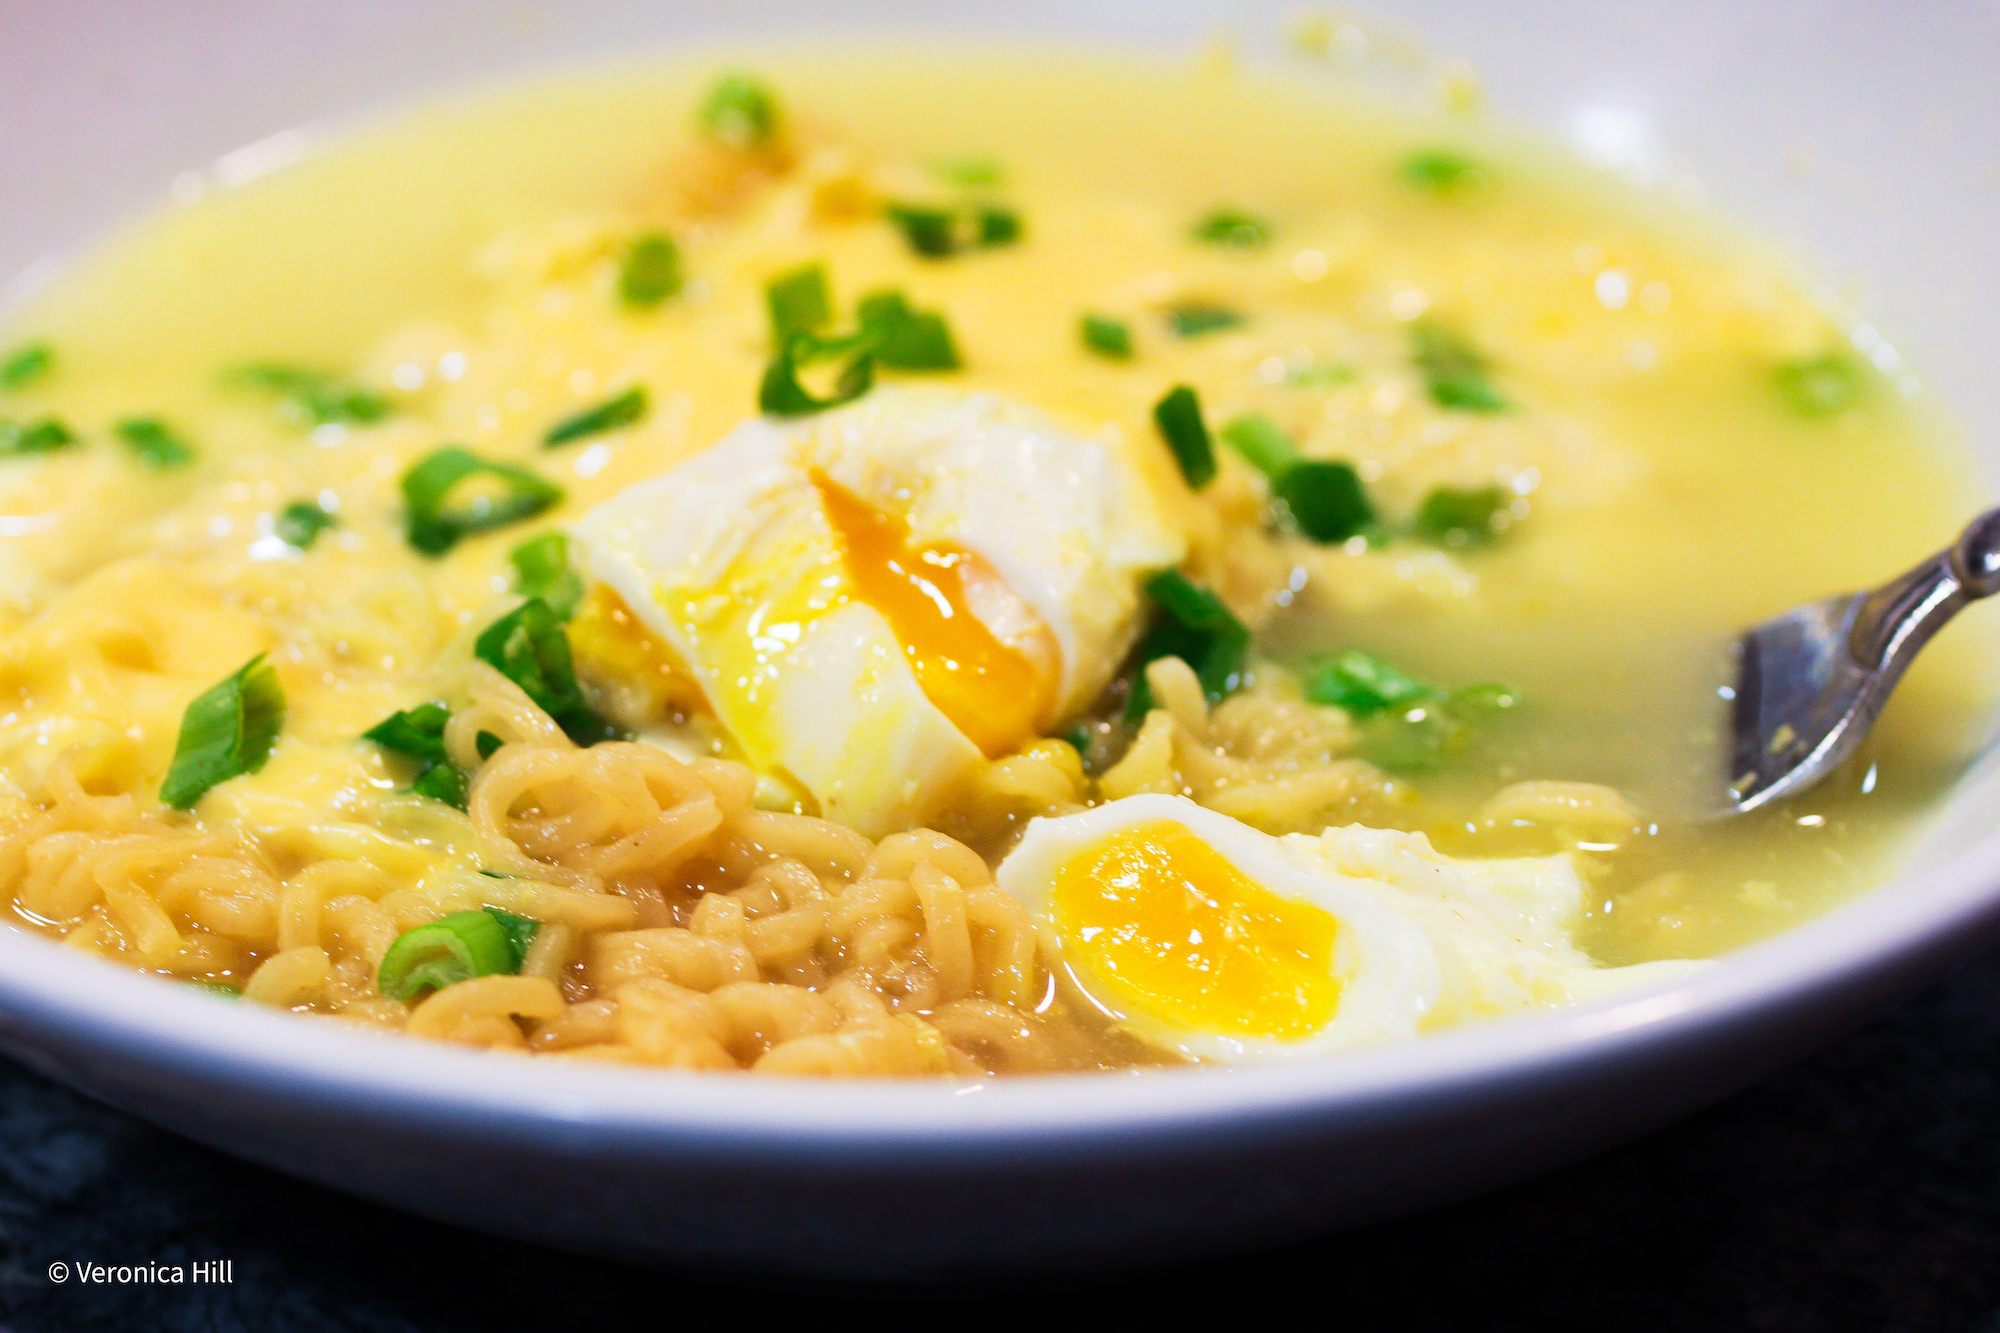 The Roy Choi Ramen hack features ramen noodles with poached egg and green onions